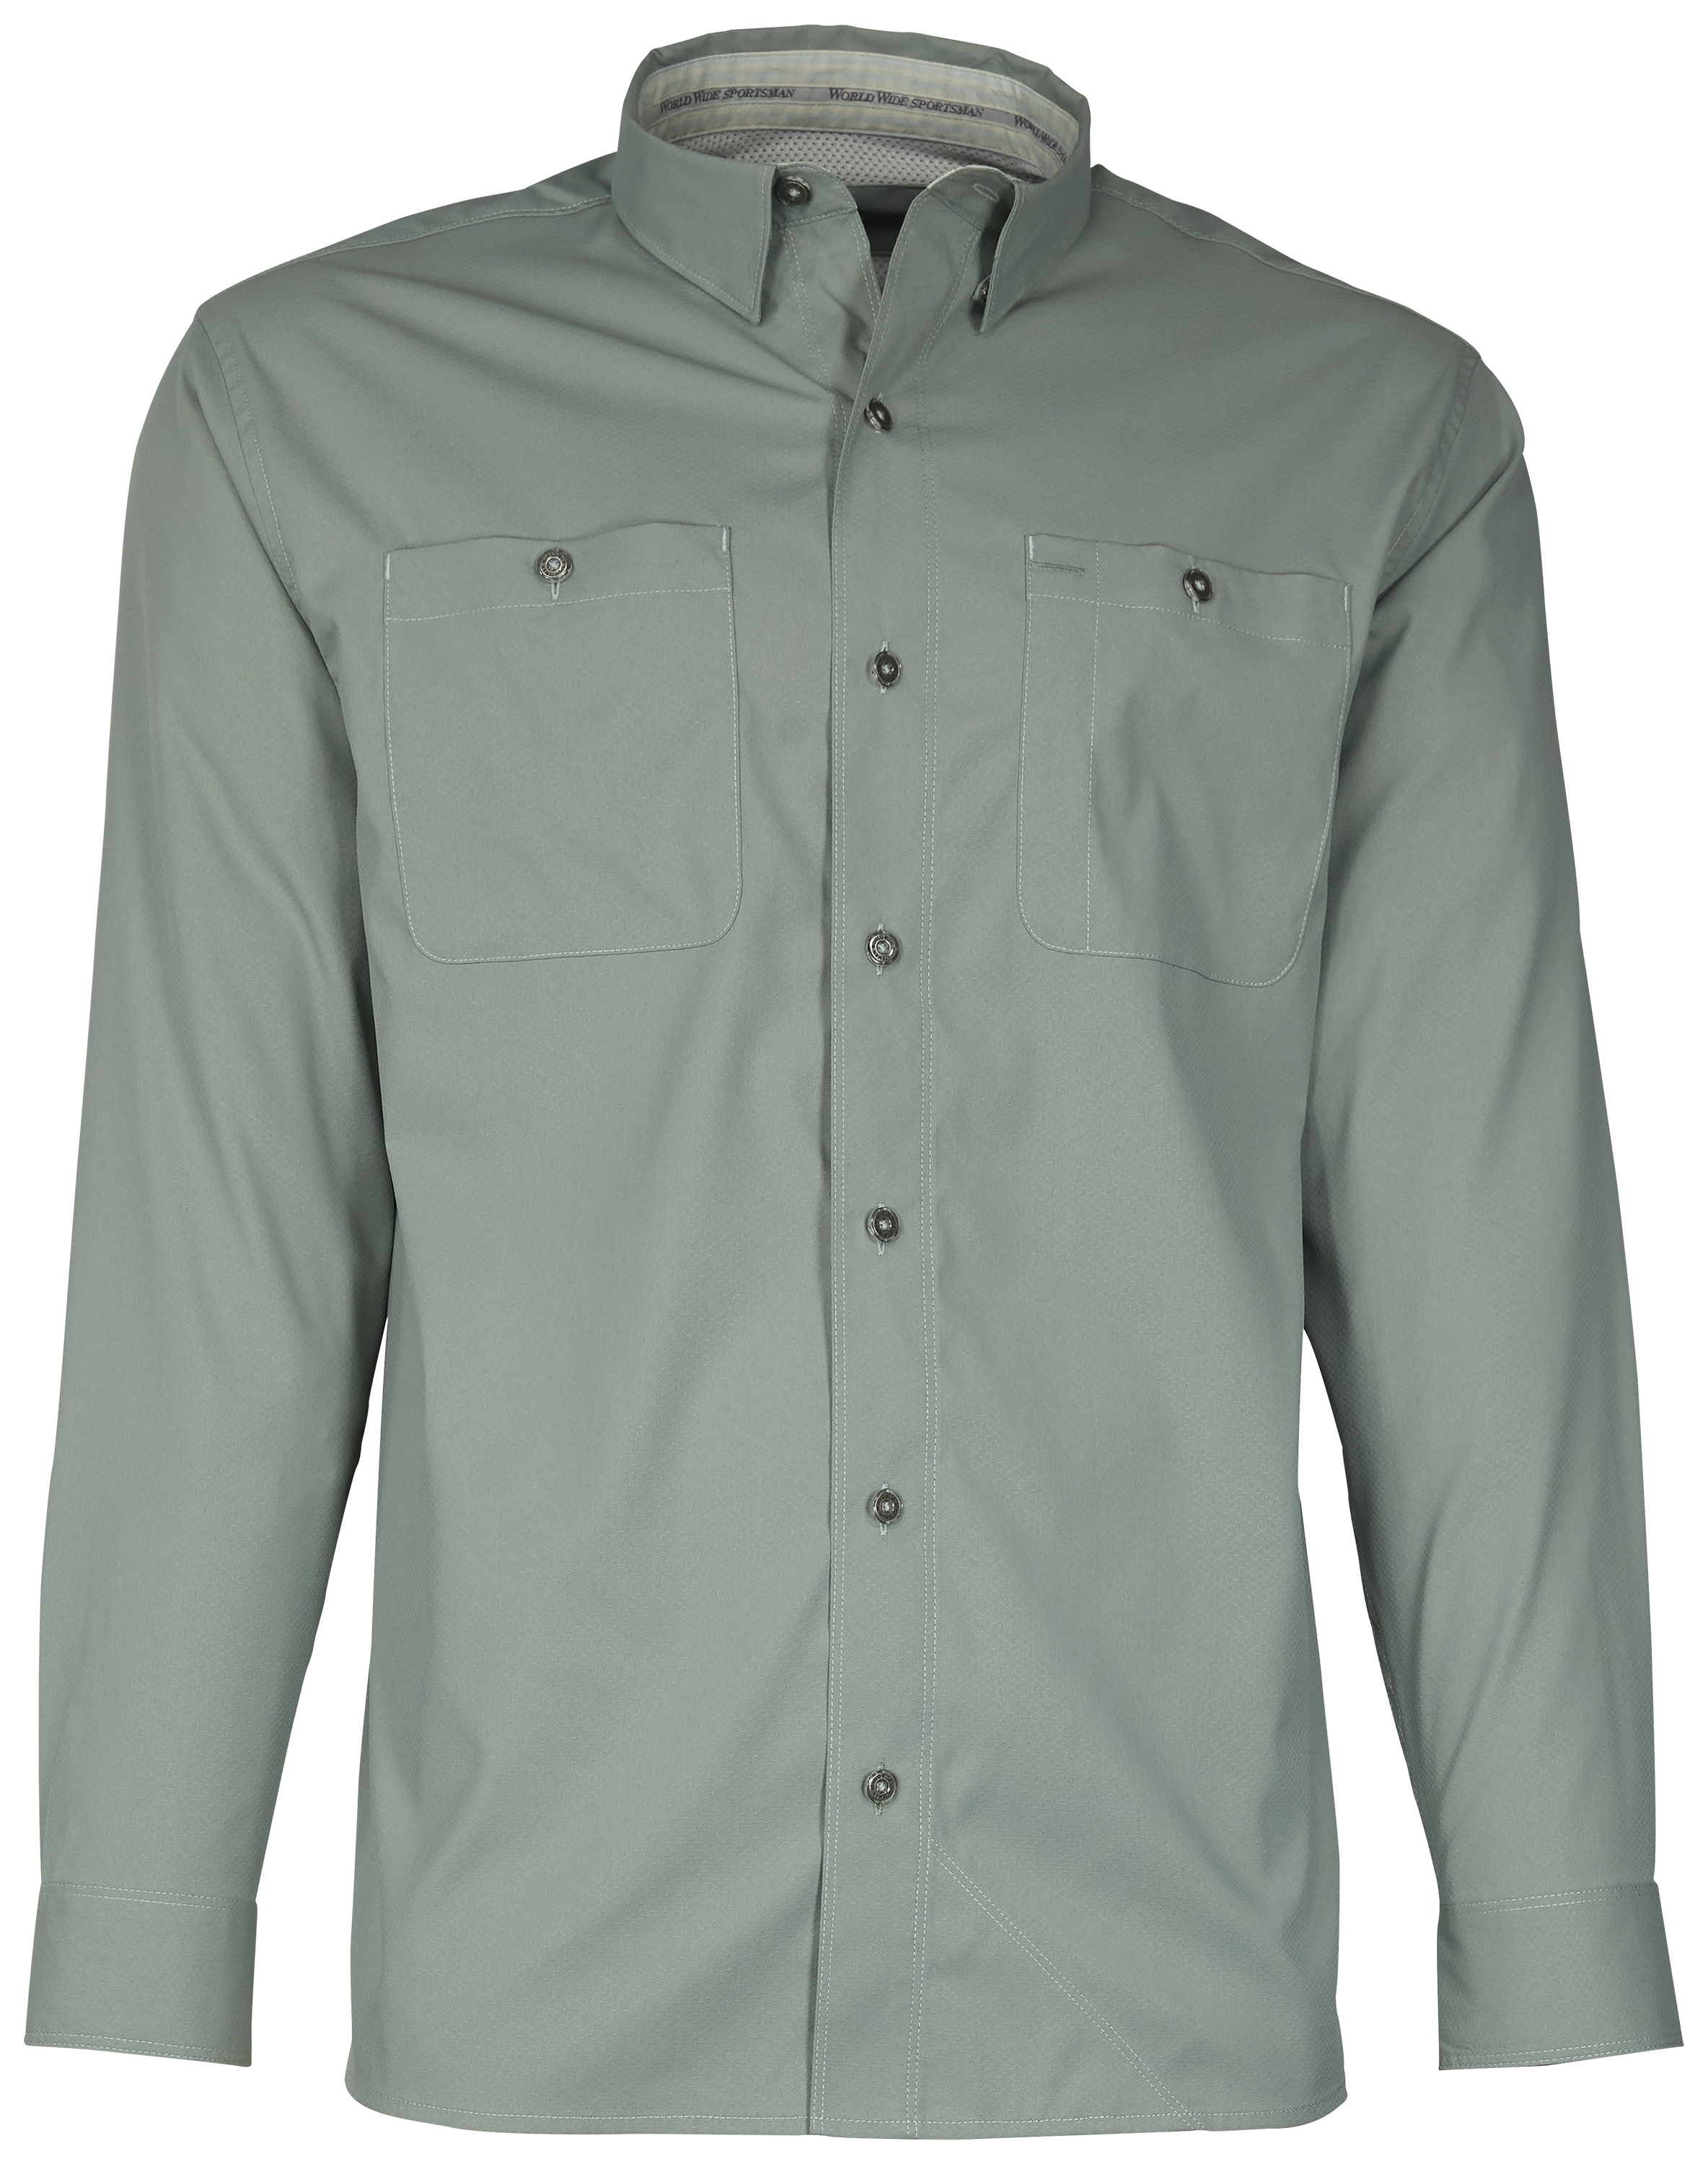 World Wide Sportsman Ultimate Angler Solid Button-Down Long-Sleeve Shirt for Men - Harbor Gray - 2XL